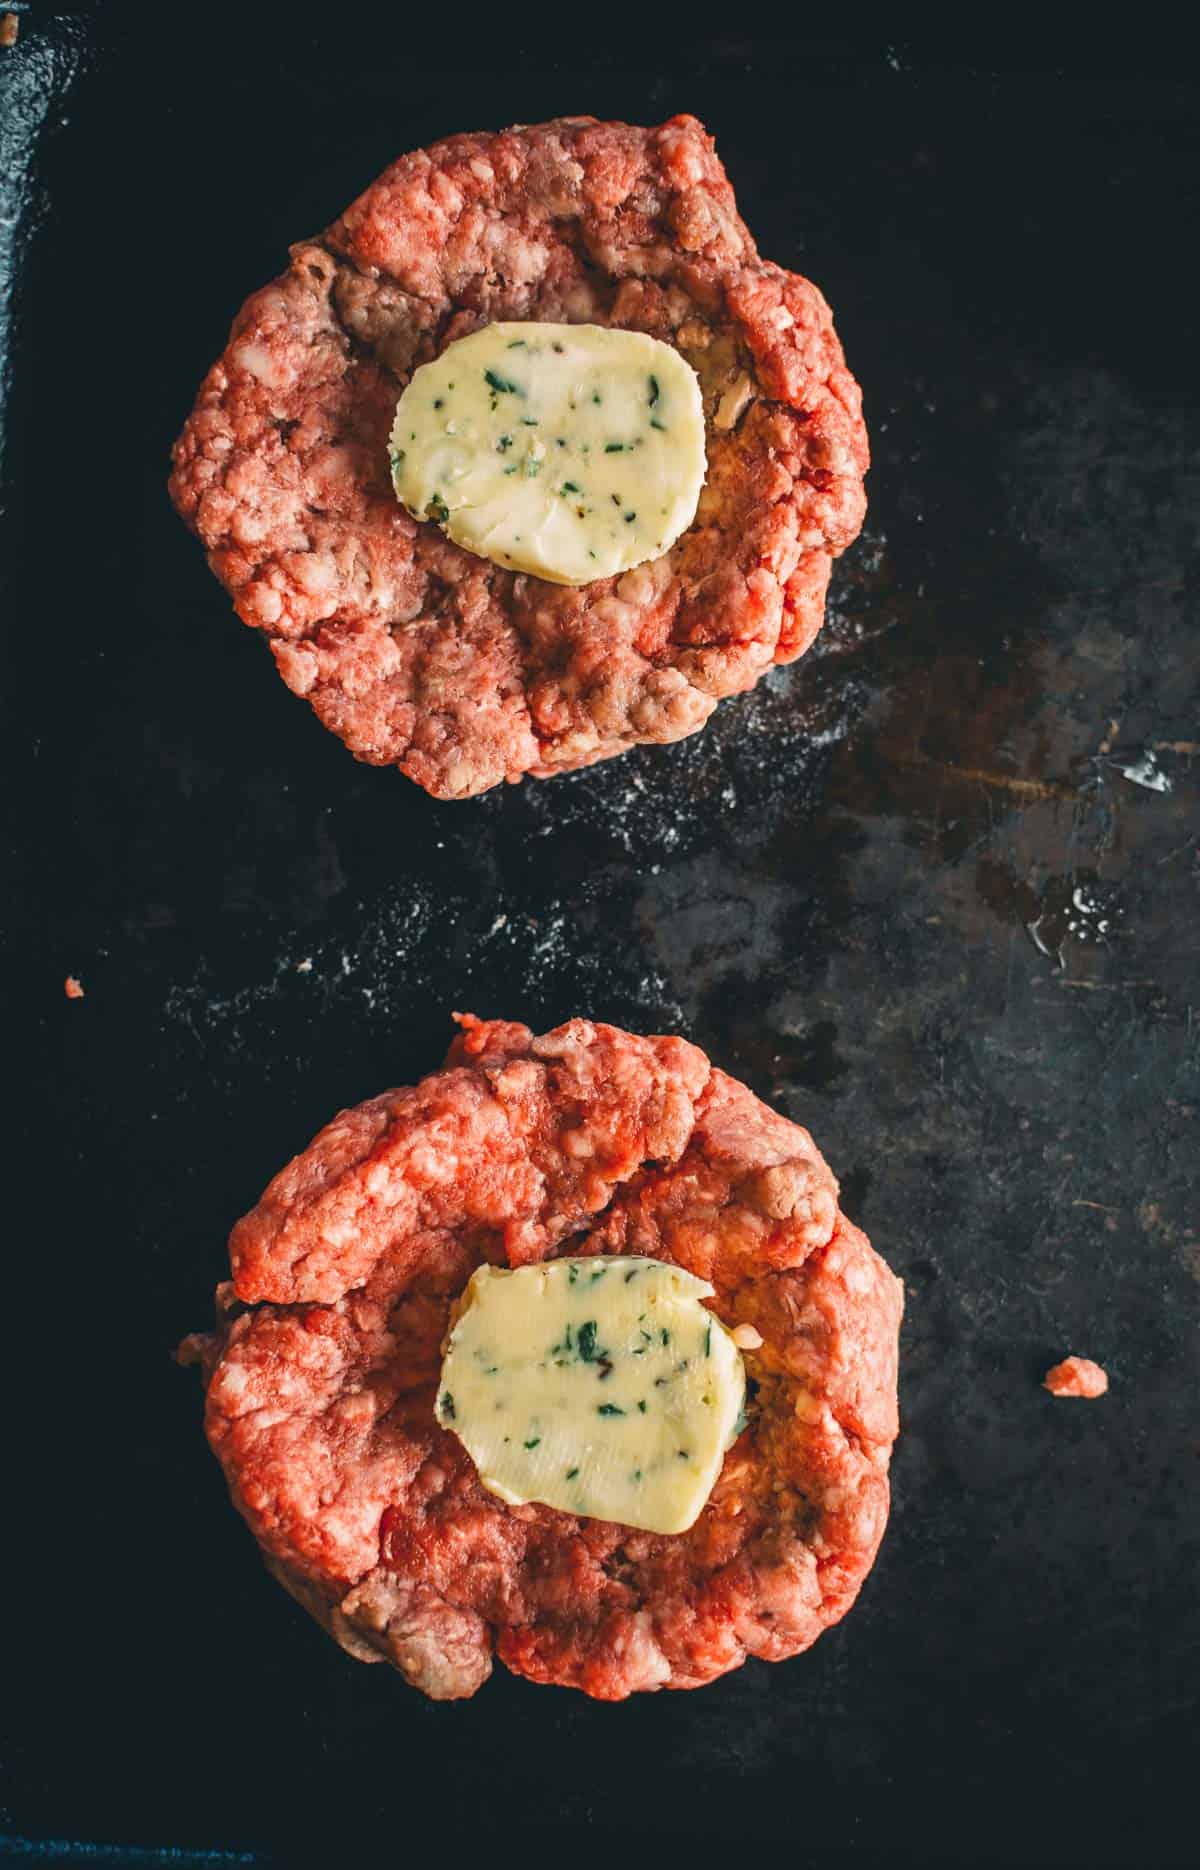 Two raw hamburger patties on a dark surface, each topped with a slice of herb butter.